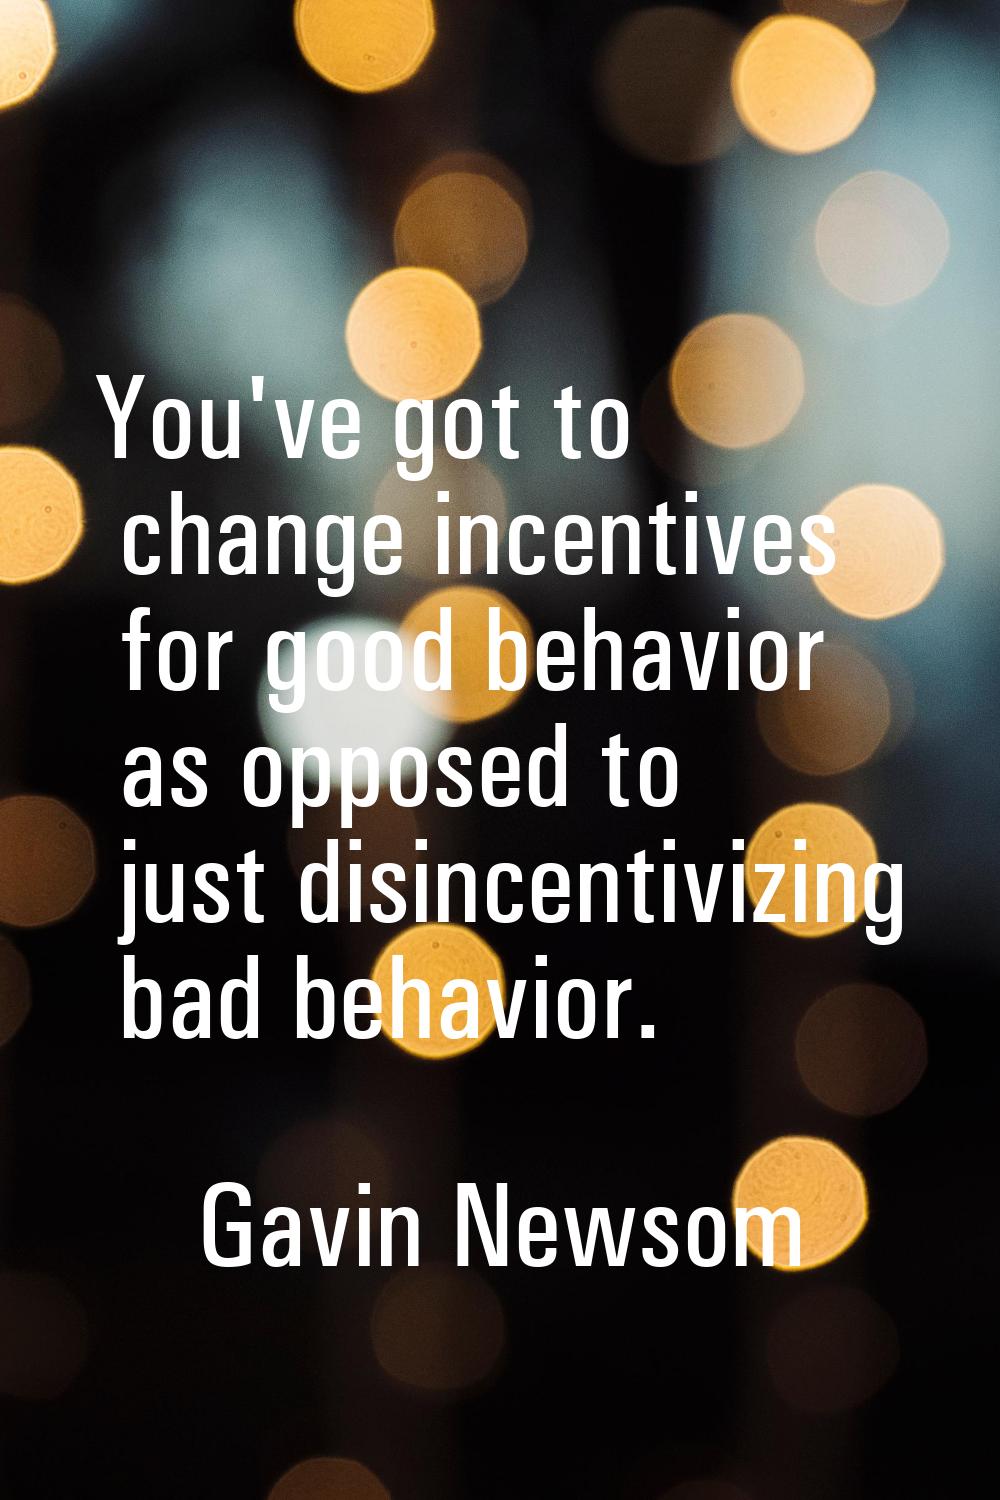 You've got to change incentives for good behavior as opposed to just disincentivizing bad behavior.